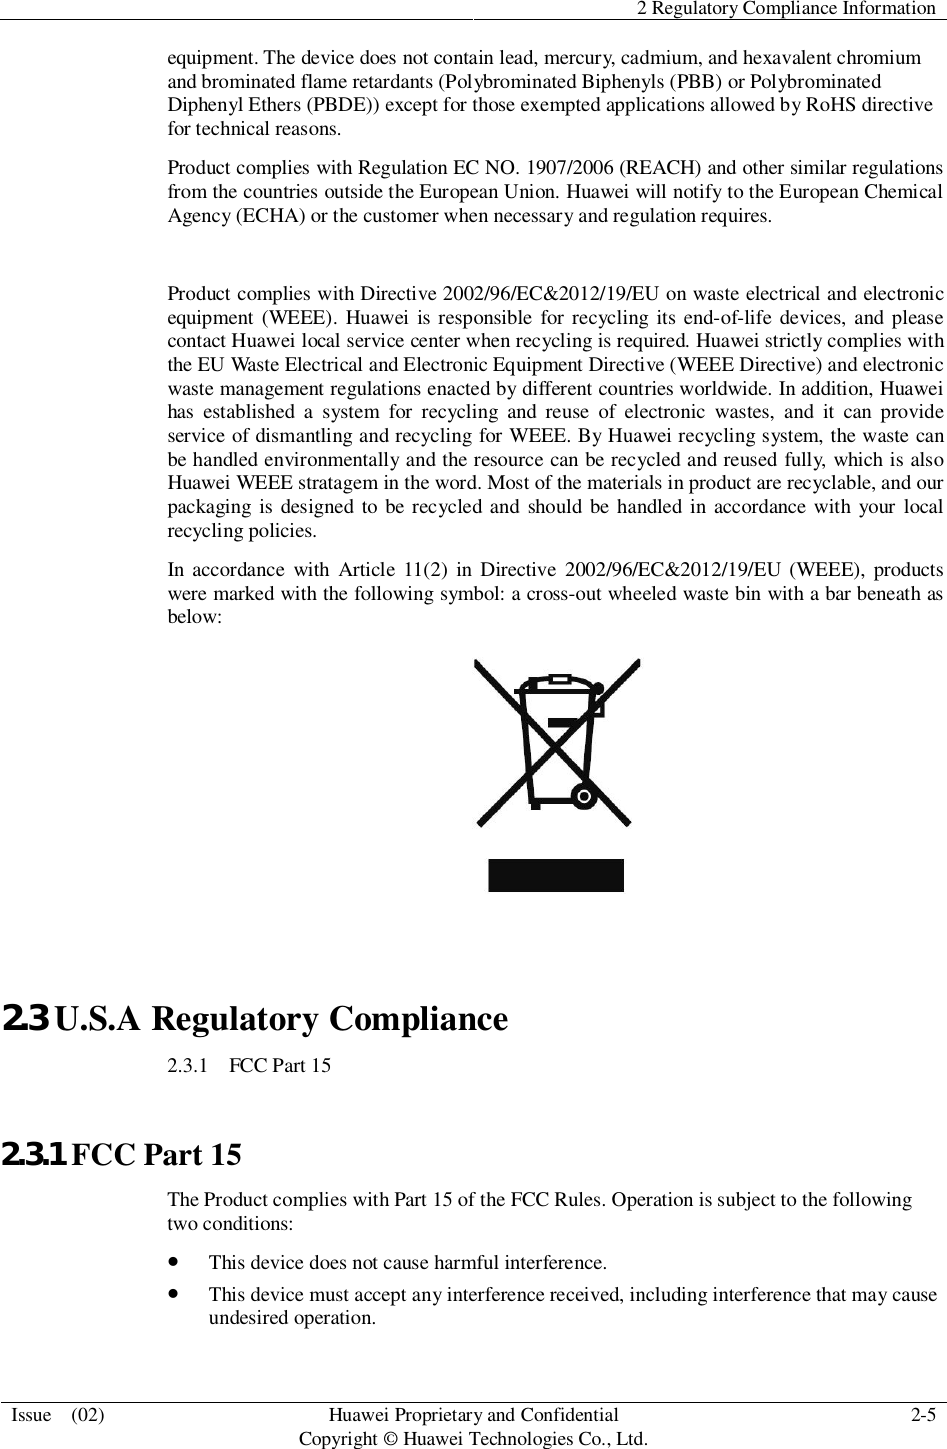 2 Regulatory Compliance InformationIssue  (02) HuaweiProprietary and ConfidentialCopyright © Huawei Technologies Co., Ltd. 2-5equipment. The device does not contain lead, mercury, cadmium, and hexavalent chromiumand brominated flame retardants (Polybrominated Biphenyls (PBB) or PolybrominatedDiphenyl Ethers (PBDE)) except for those exempted applications allowed by RoHS directivefor technical reasons.Product complies with Regulation EC NO. 1907/2006 (REACH) and other similar regulationsfrom the countries outside the European Union. Huawei will notify to the European ChemicalAgency (ECHA) or the customer when necessary and regulation requires.Product complies with Directive 2002/96/EC&amp;2012/19/EU on waste electrical and electronicequipment (WEEE). Huawei is responsible for recycling its end-of-life devices, and pleasecontact Huawei local service center when recycling is required. Huawei strictly complies withthe EU Waste Electrical and Electronic Equipment Directive (WEEE Directive) and electronicwaste management regulations enacted by different countries worldwide. In addition, Huaweihas established a system for recycling and reuse of electronic wastes, and it can provideservice of dismantling and recycling for WEEE. By Huawei recycling system, the waste canbe handled environmentally and the resource can be recycled and reused fully, which is alsoHuawei WEEE stratagem in the word. Most of the materials in product are recyclable, and ourpackaging is designed to be recycled and should be handled in accordance with your localrecycling policies.In accordance with Article 11(2) in Directive 2002/96/EC&amp;2012/19/EU (WEEE), productswere marked with the following symbol: a cross-out wheeled waste bin with a bar beneath asbelow:2.3 U.S.A Regulatory Compliance2.3.1   FCC Part 152.3.1 FCC Part 15The Product complies with Part 15 of the FCC Rules. Operation is subject to the followingtwo conditions:This device does not cause harmful interference.This device must accept any interference received, including interference that may causeundesired operation.